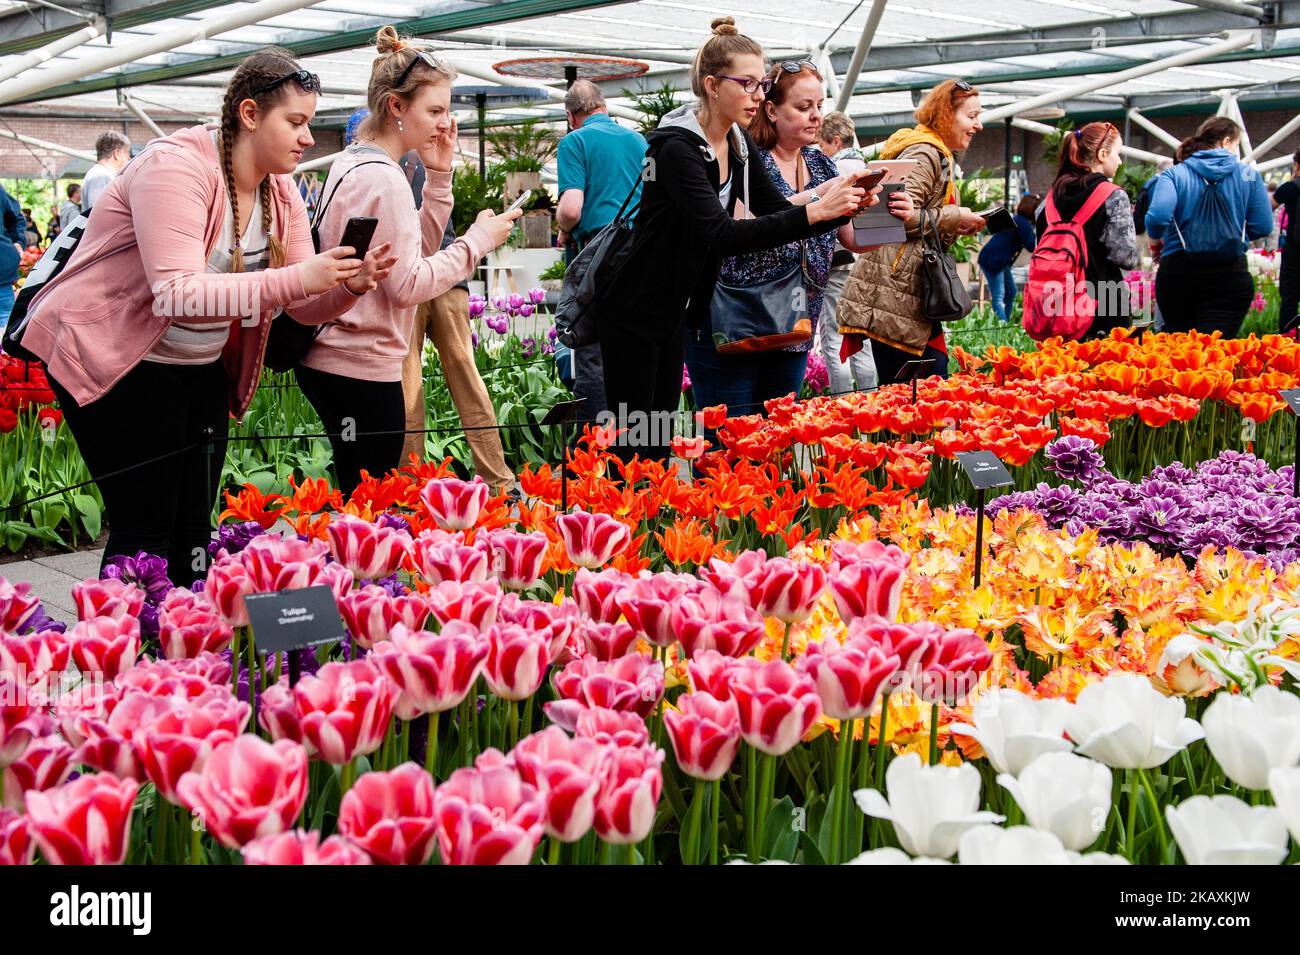 April 21, 2018 - Lisse. Keukenhof is also known as the Garden of Europe one of the world's largest flower gardens in Lisse, The Netherlands. The theme for Keukenhof 2018 is 'Romance in Flowers'. The park houses many early flowering species and the Willem-Alexander pavilion is already showing over 500 varieties of flowering tulip. Keukenhof is the place to enjoy millions of flowering tulips, daffodils and other bulb flowers this spring. By the time it closes on 13 May 2018, the flower exhibition will have received over one million visitors from across the globe. (Photo by Romy Arroyo Fernandez/ Stock Photo